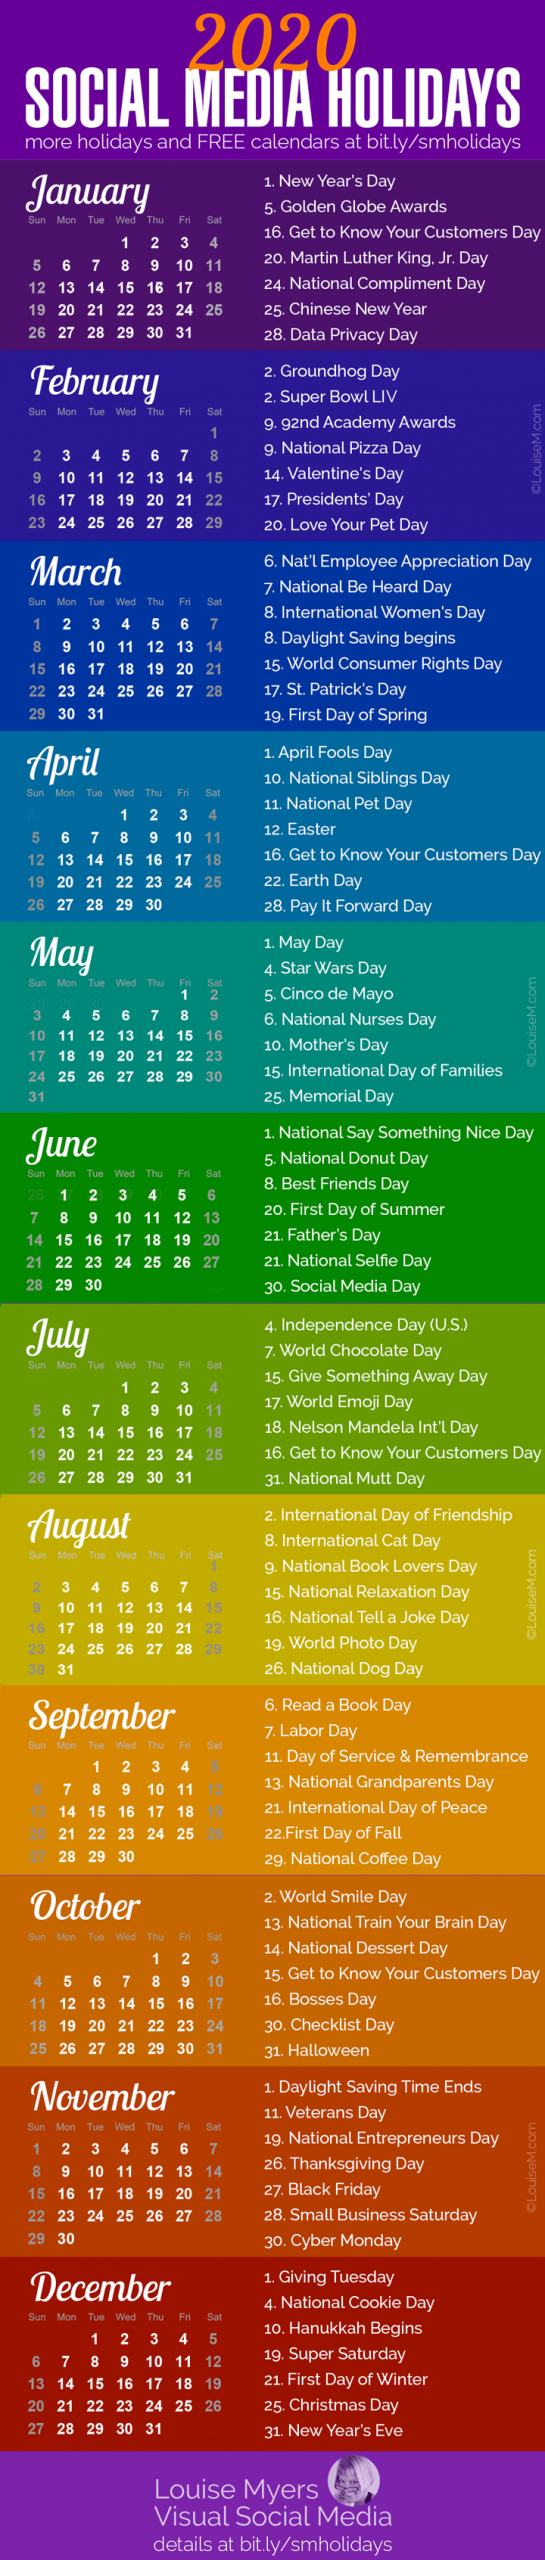 84 Social Media Holidays You Need In 2020: Indispensable!